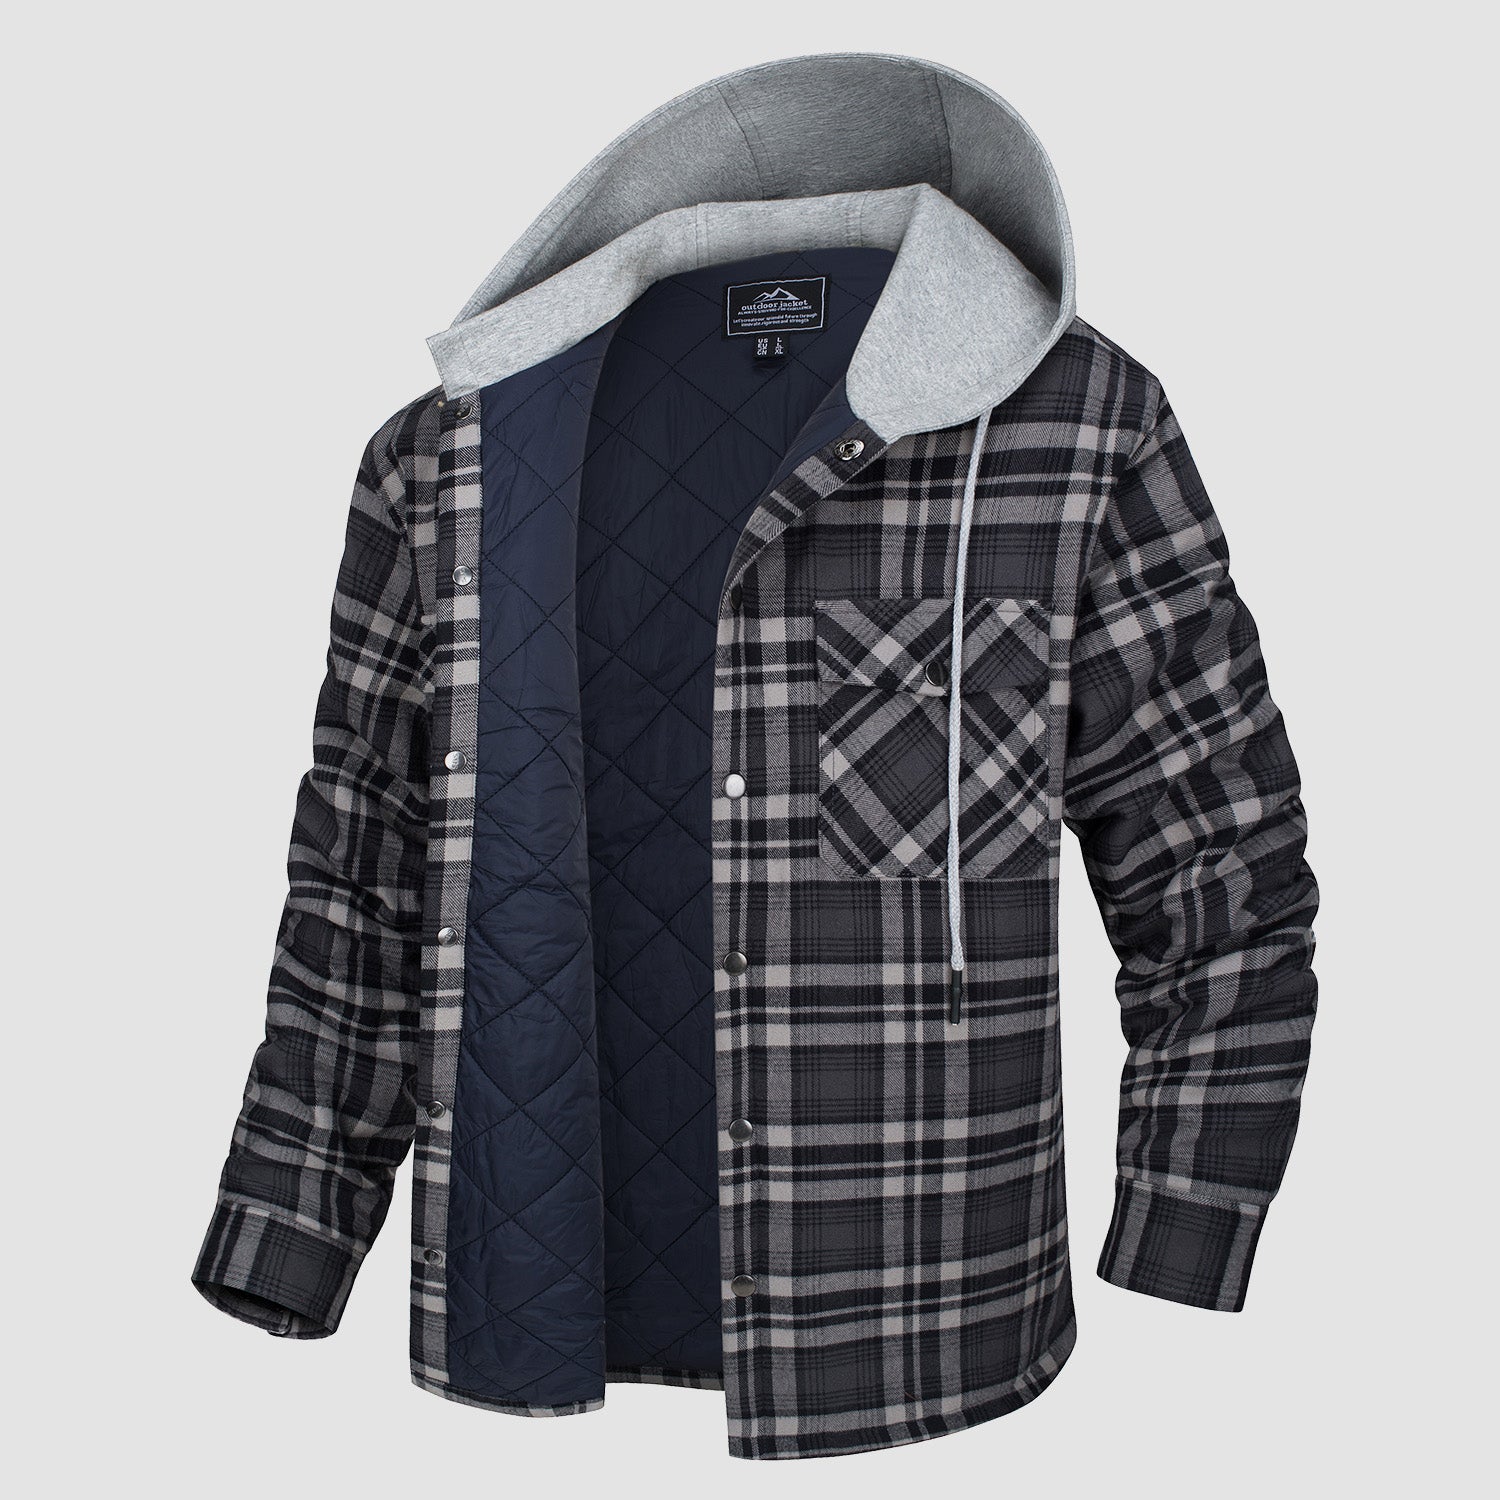 Men's Flannel Plaid Shirt Jacket with Hood Quilted Lined  Coat